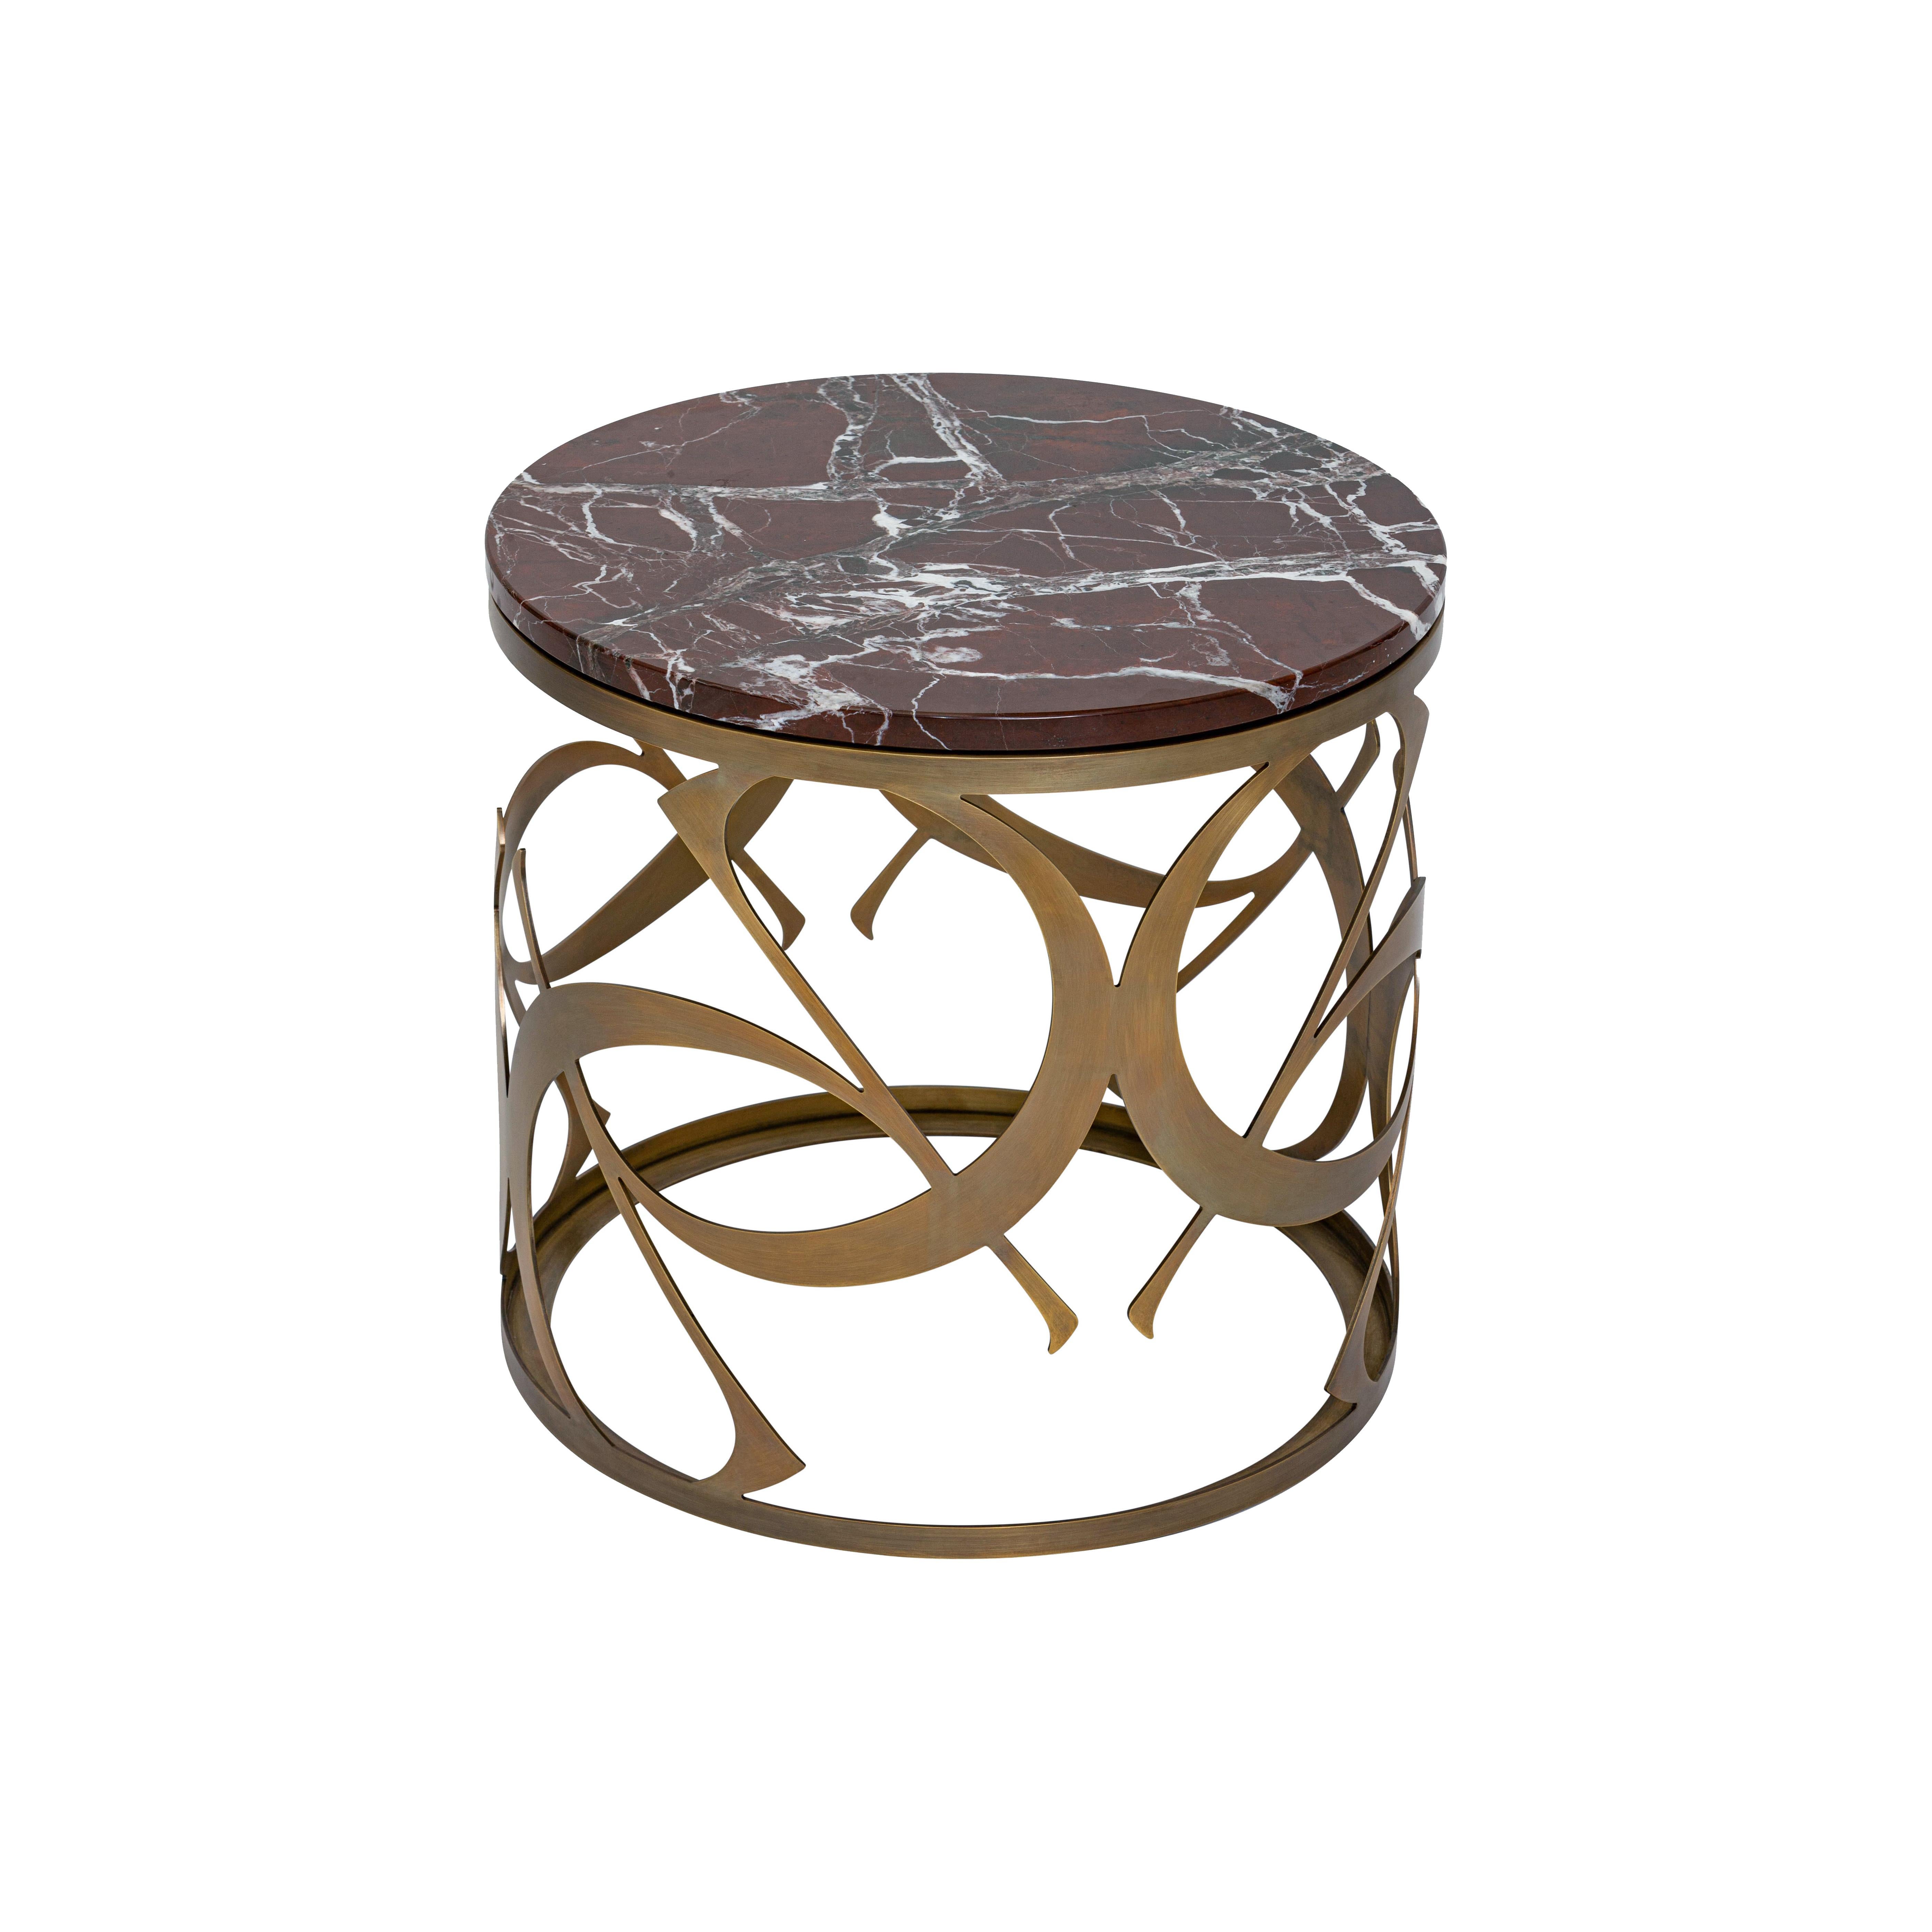 21st century Art Déco Elie Saab Maison red marble monogram coffee table, Italy

The delicate intertwining Elie Saab monogram transforms this coffee table into an eye-catching design piece with a contemporary spirit. Made in Italy.

Composition: